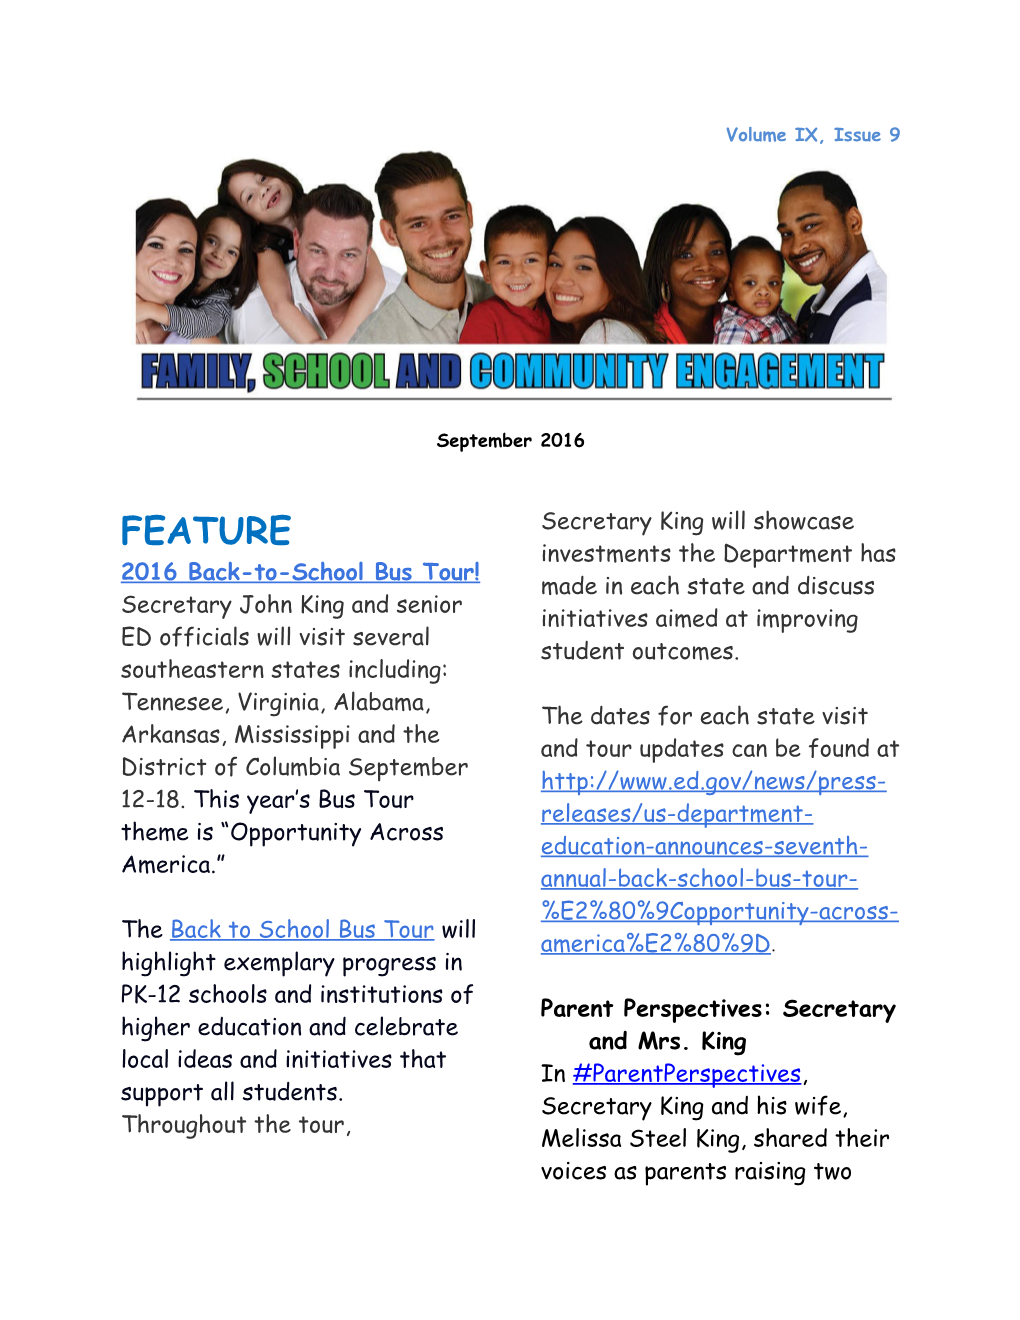 Engaging Families, Vol.9, Issue 9 (MS Word)